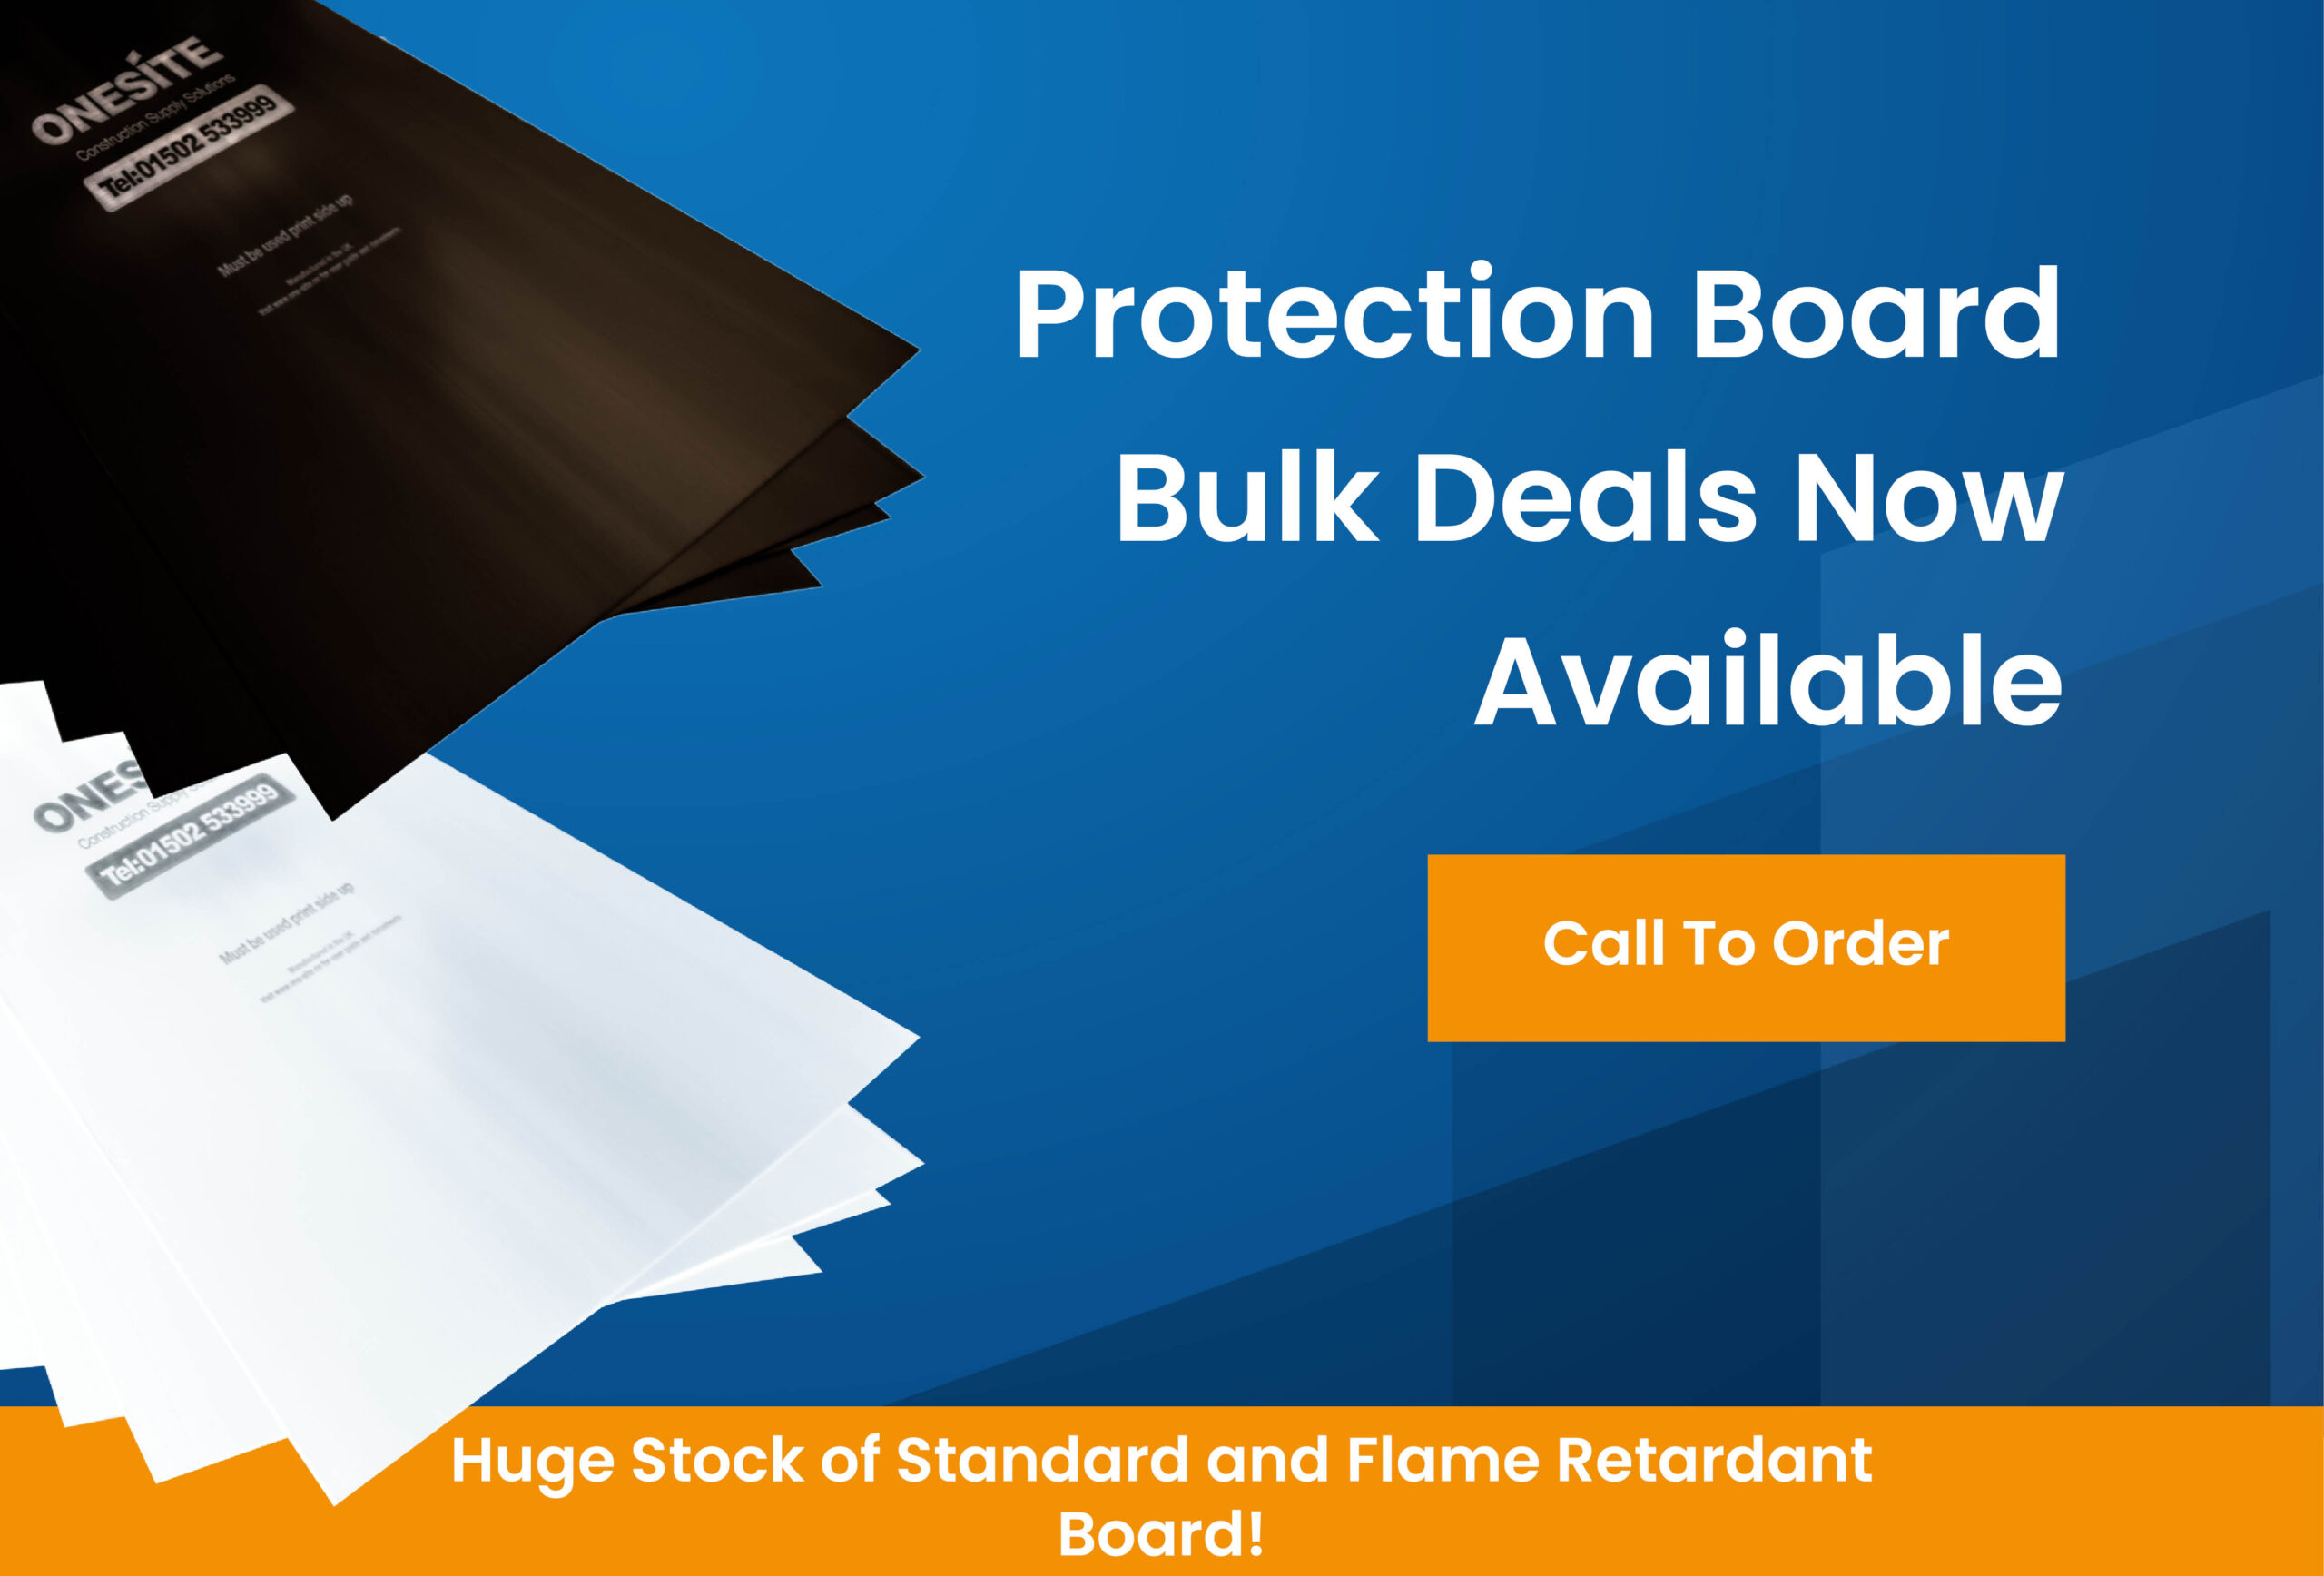 ProtectionBoard